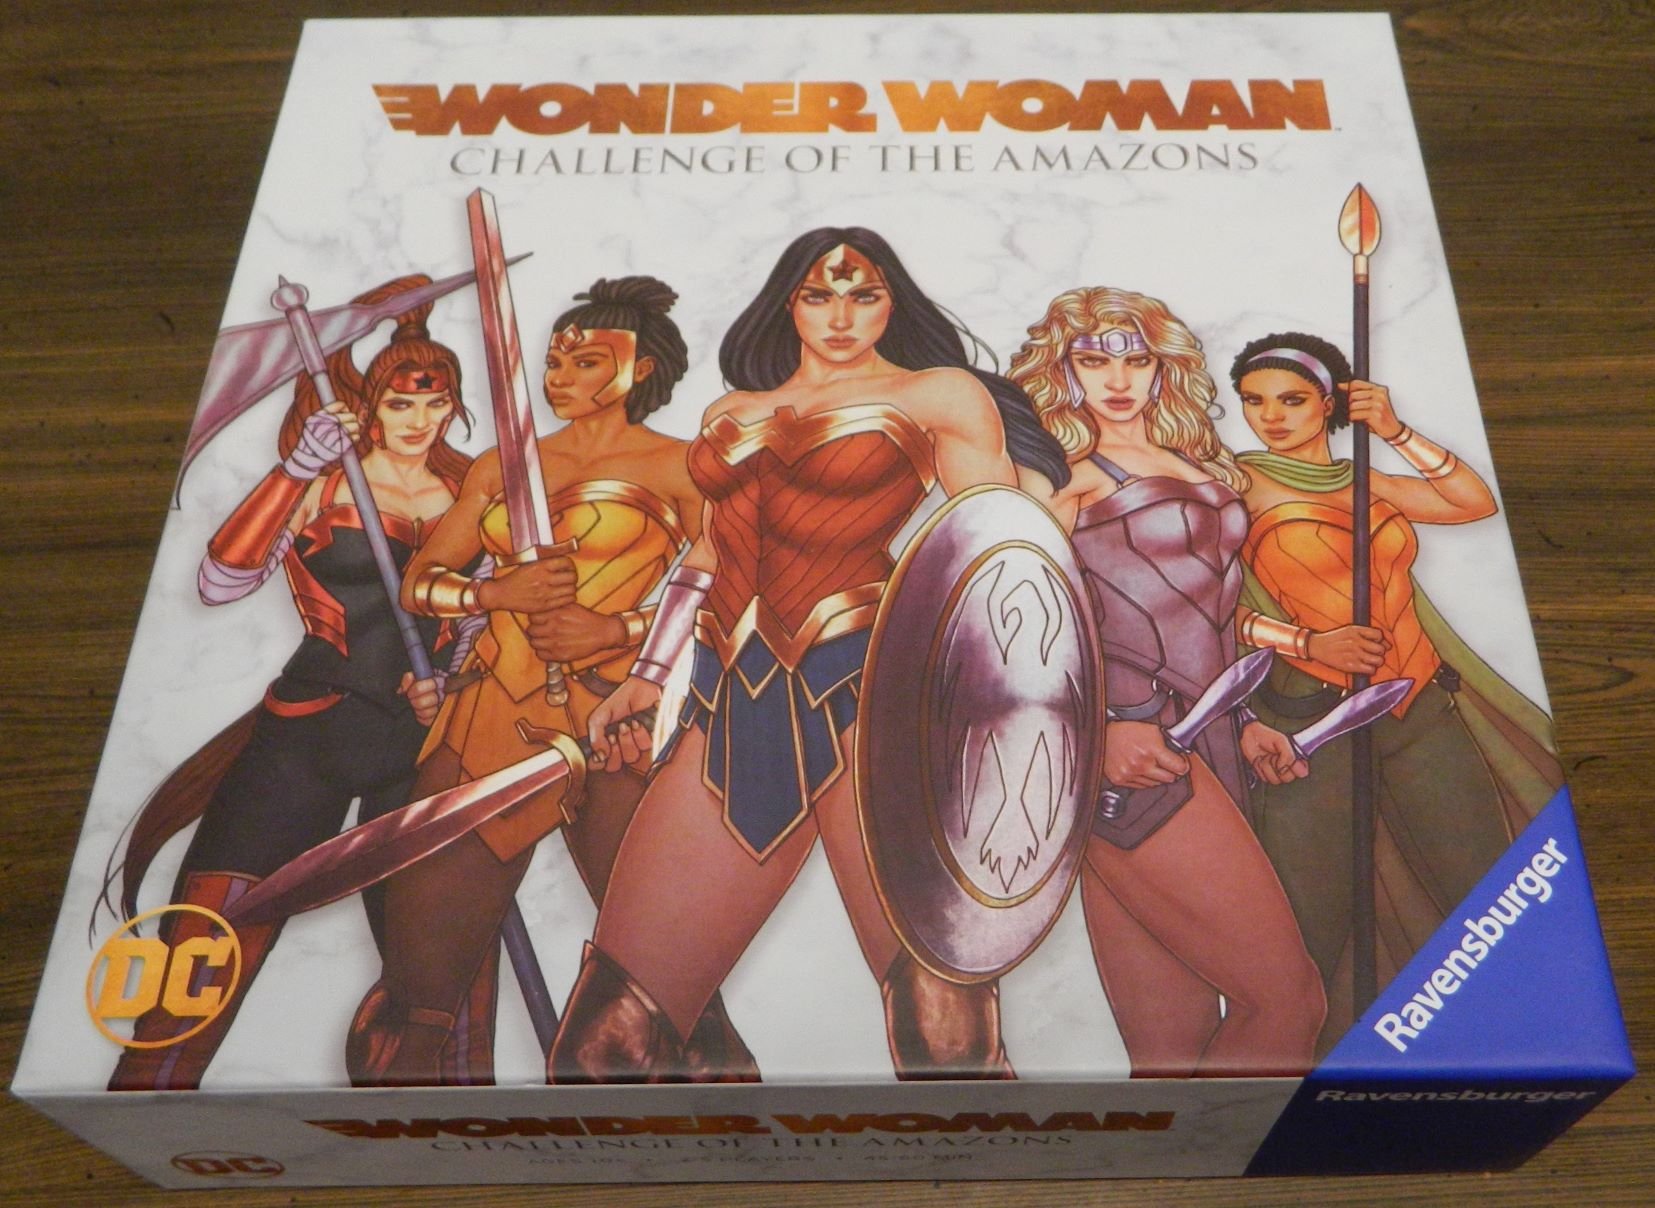 Box for Wonder Woman: Challenge of the Amazons